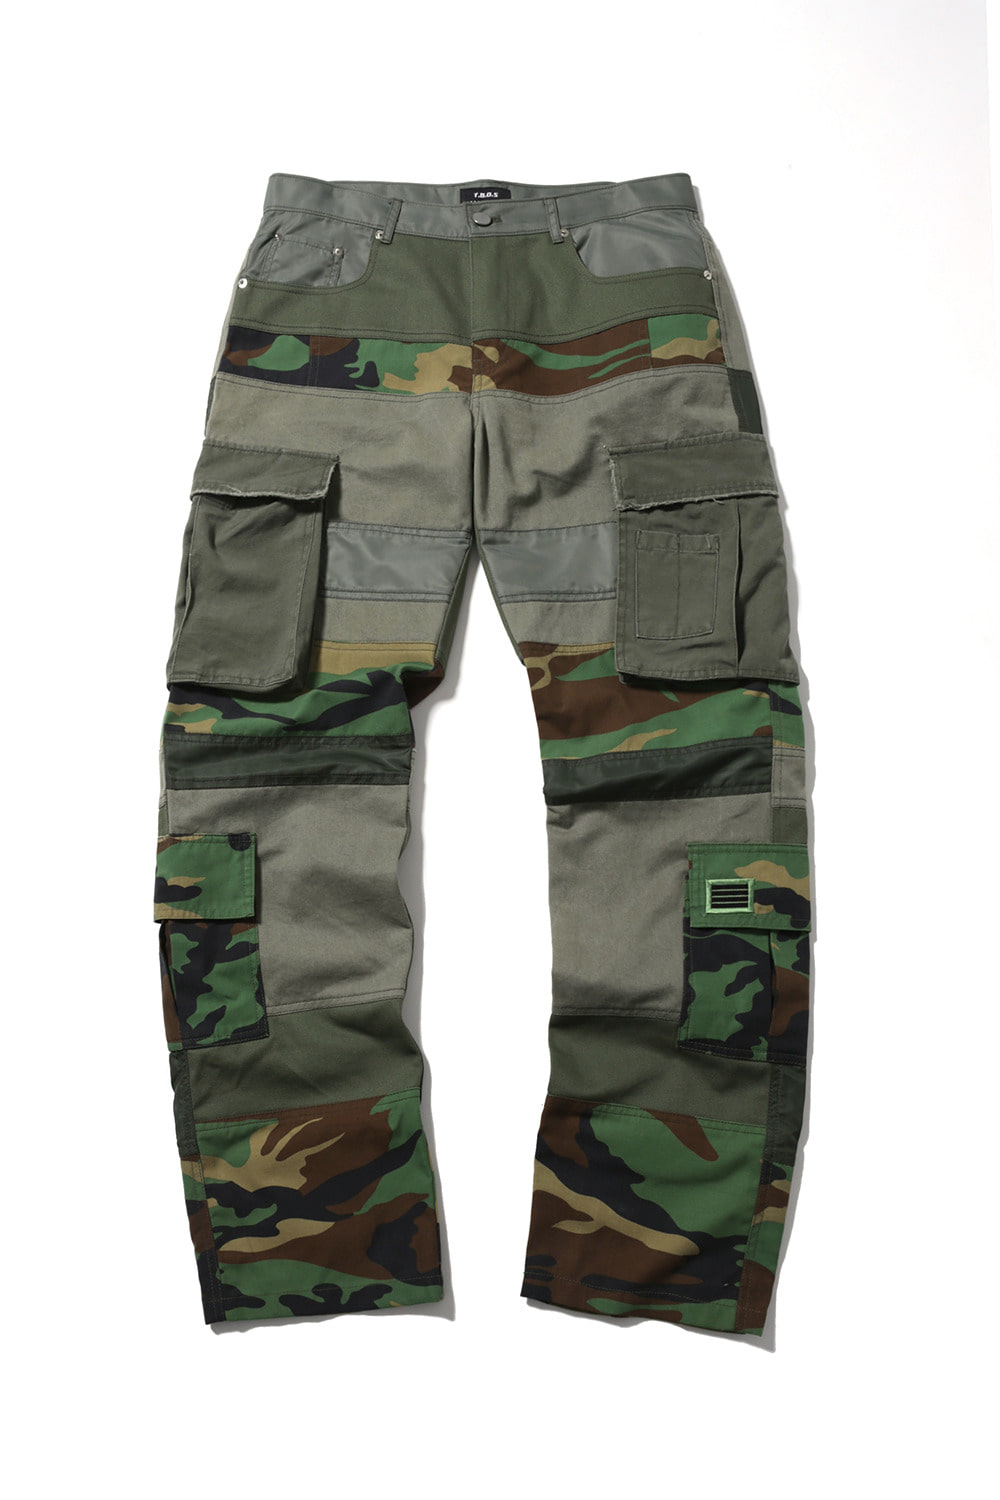 Deconstructed camouflage pants with the rank insignia of sergeant in Korean army